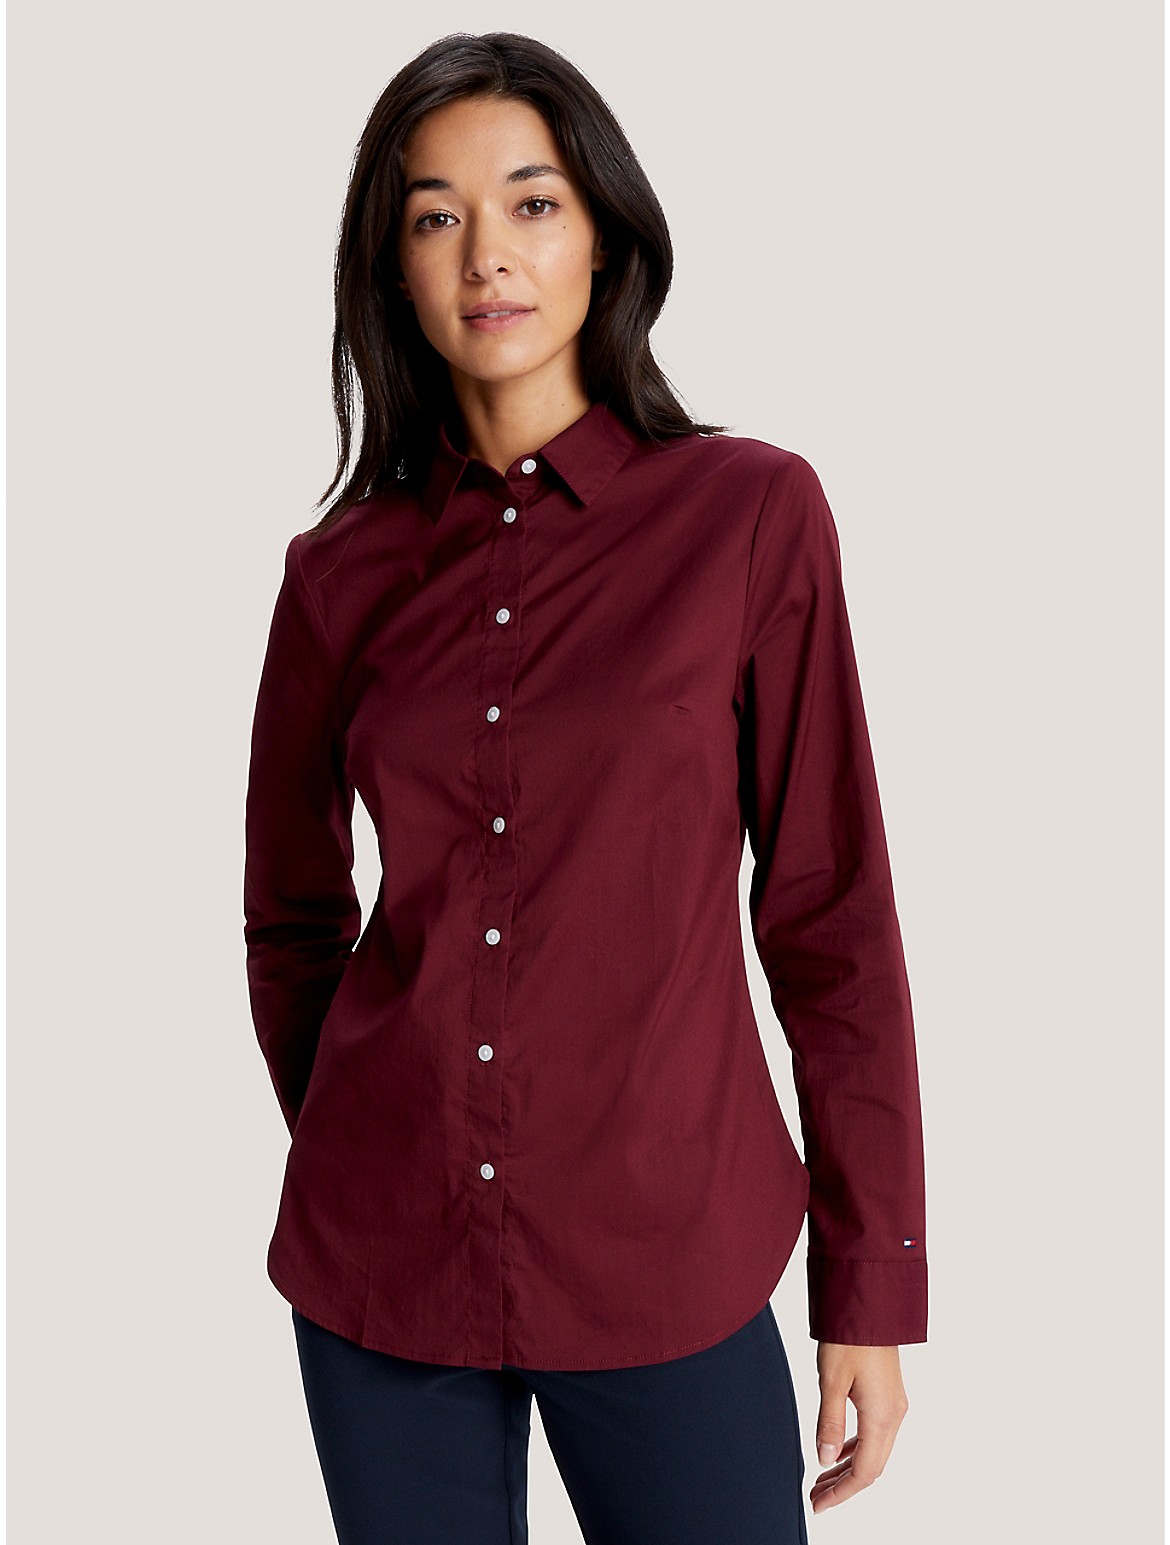 TOMMY HILFIGER Shirts for Women ModeSens 